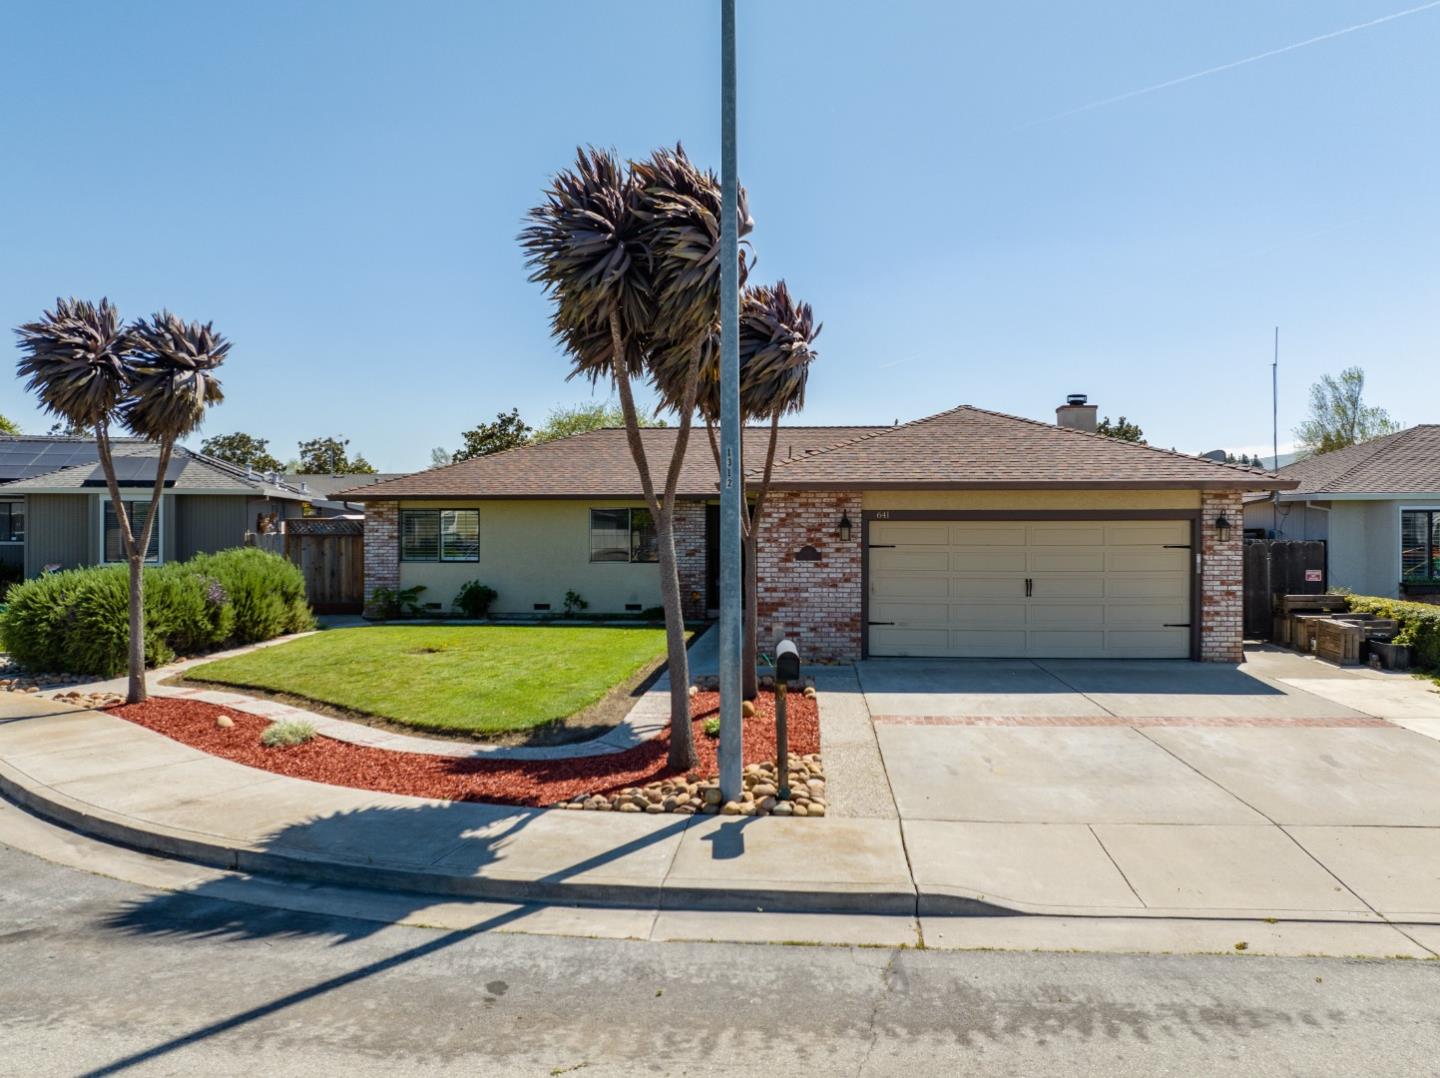 Photo of 641 Neil Dr in Hollister, CA